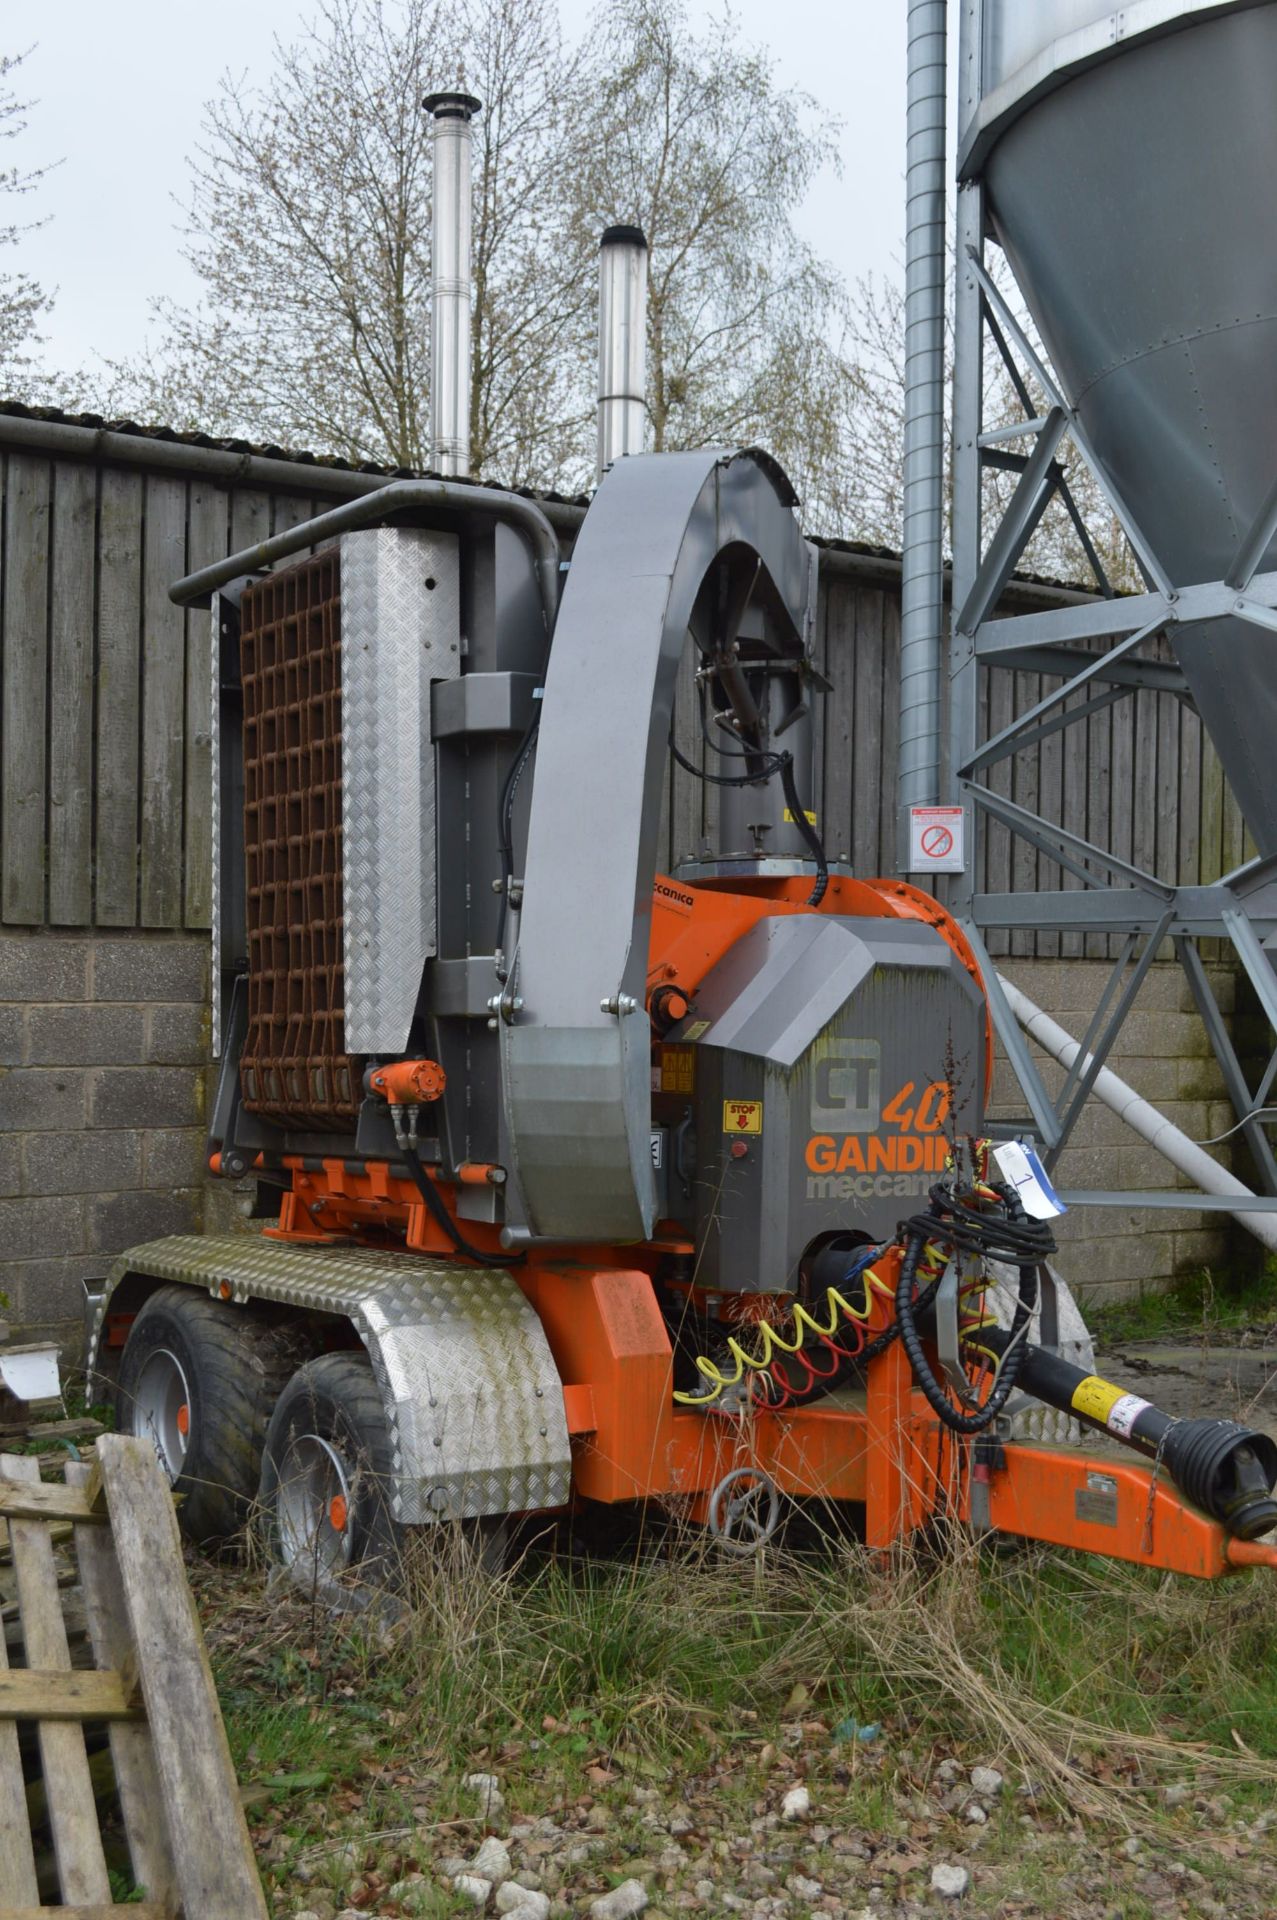 Gandini Meccanica CT40/75TTS MOBILE WOOD CHIPPER, serial no. CT40453, year of manufacture 2014, with - Image 7 of 11